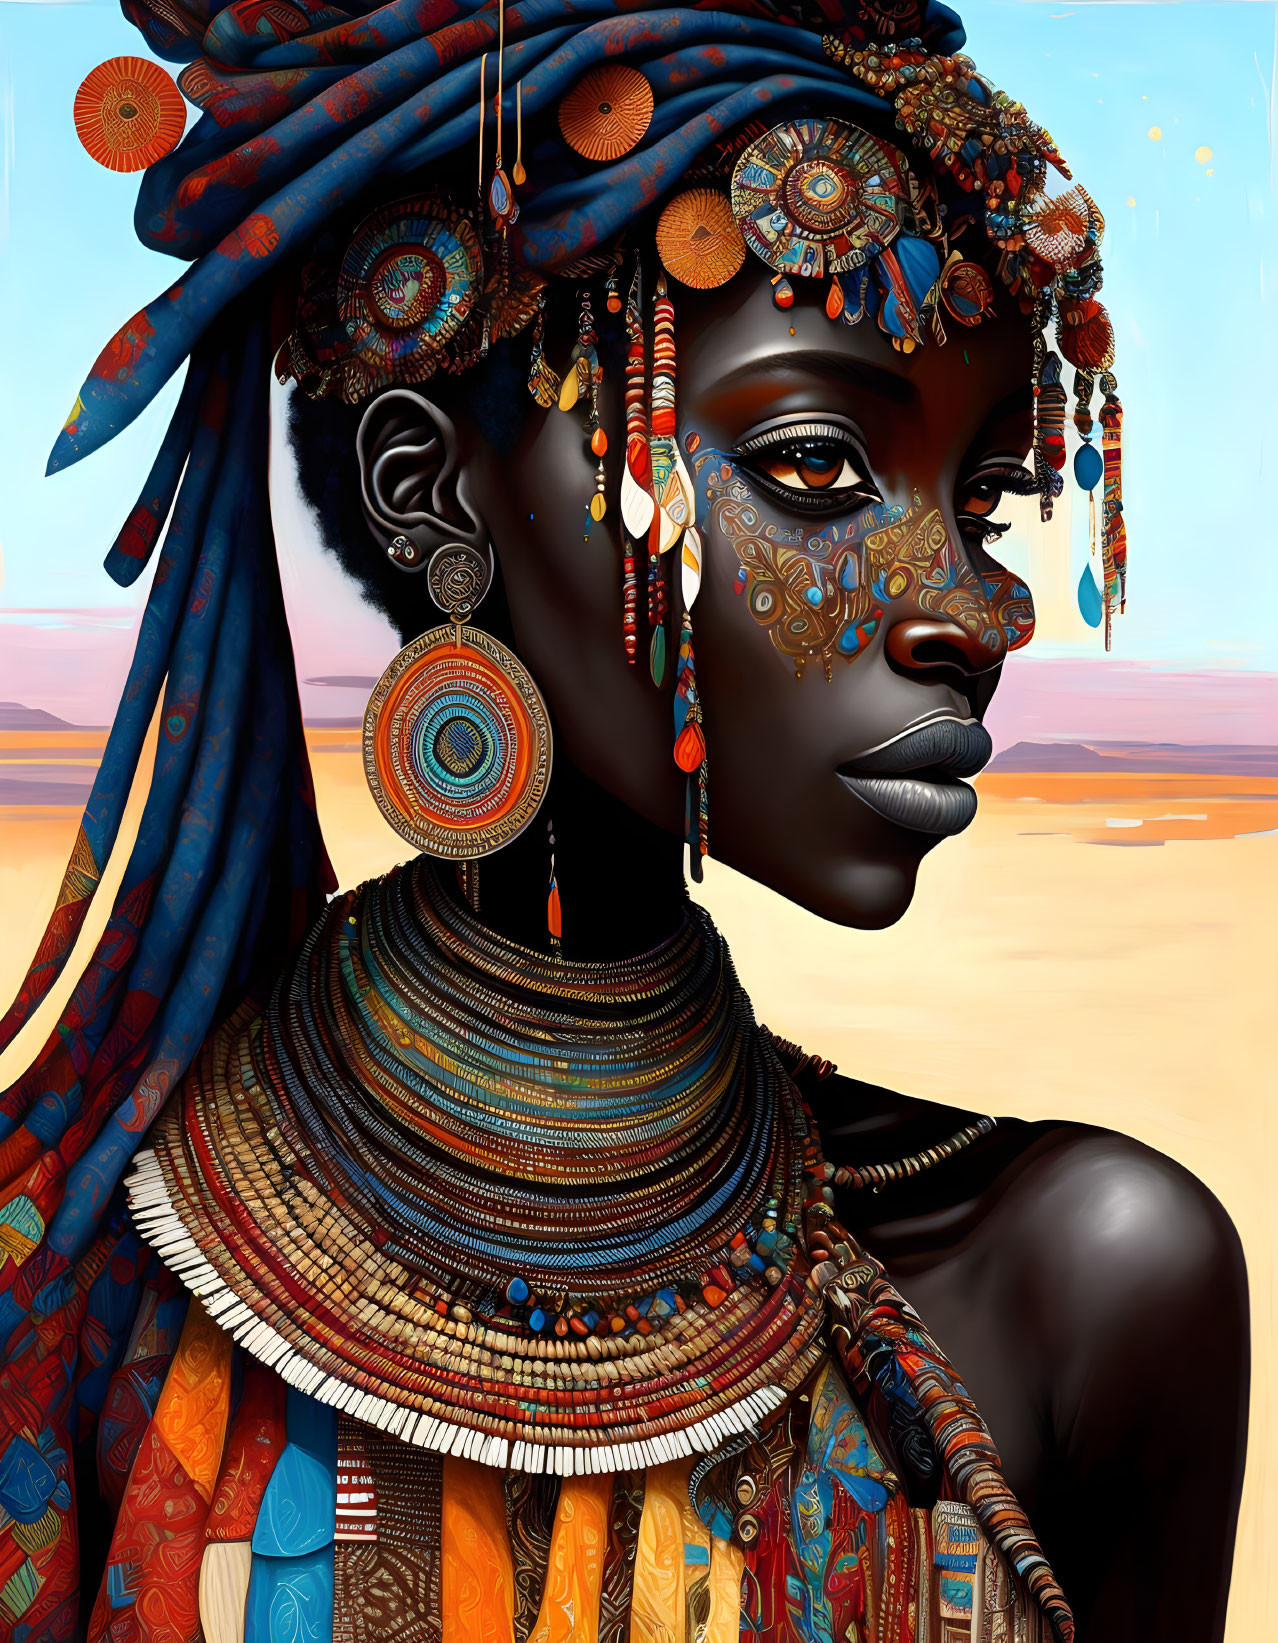 Intricate tribal face paint and colorful beadwork on woman in desert